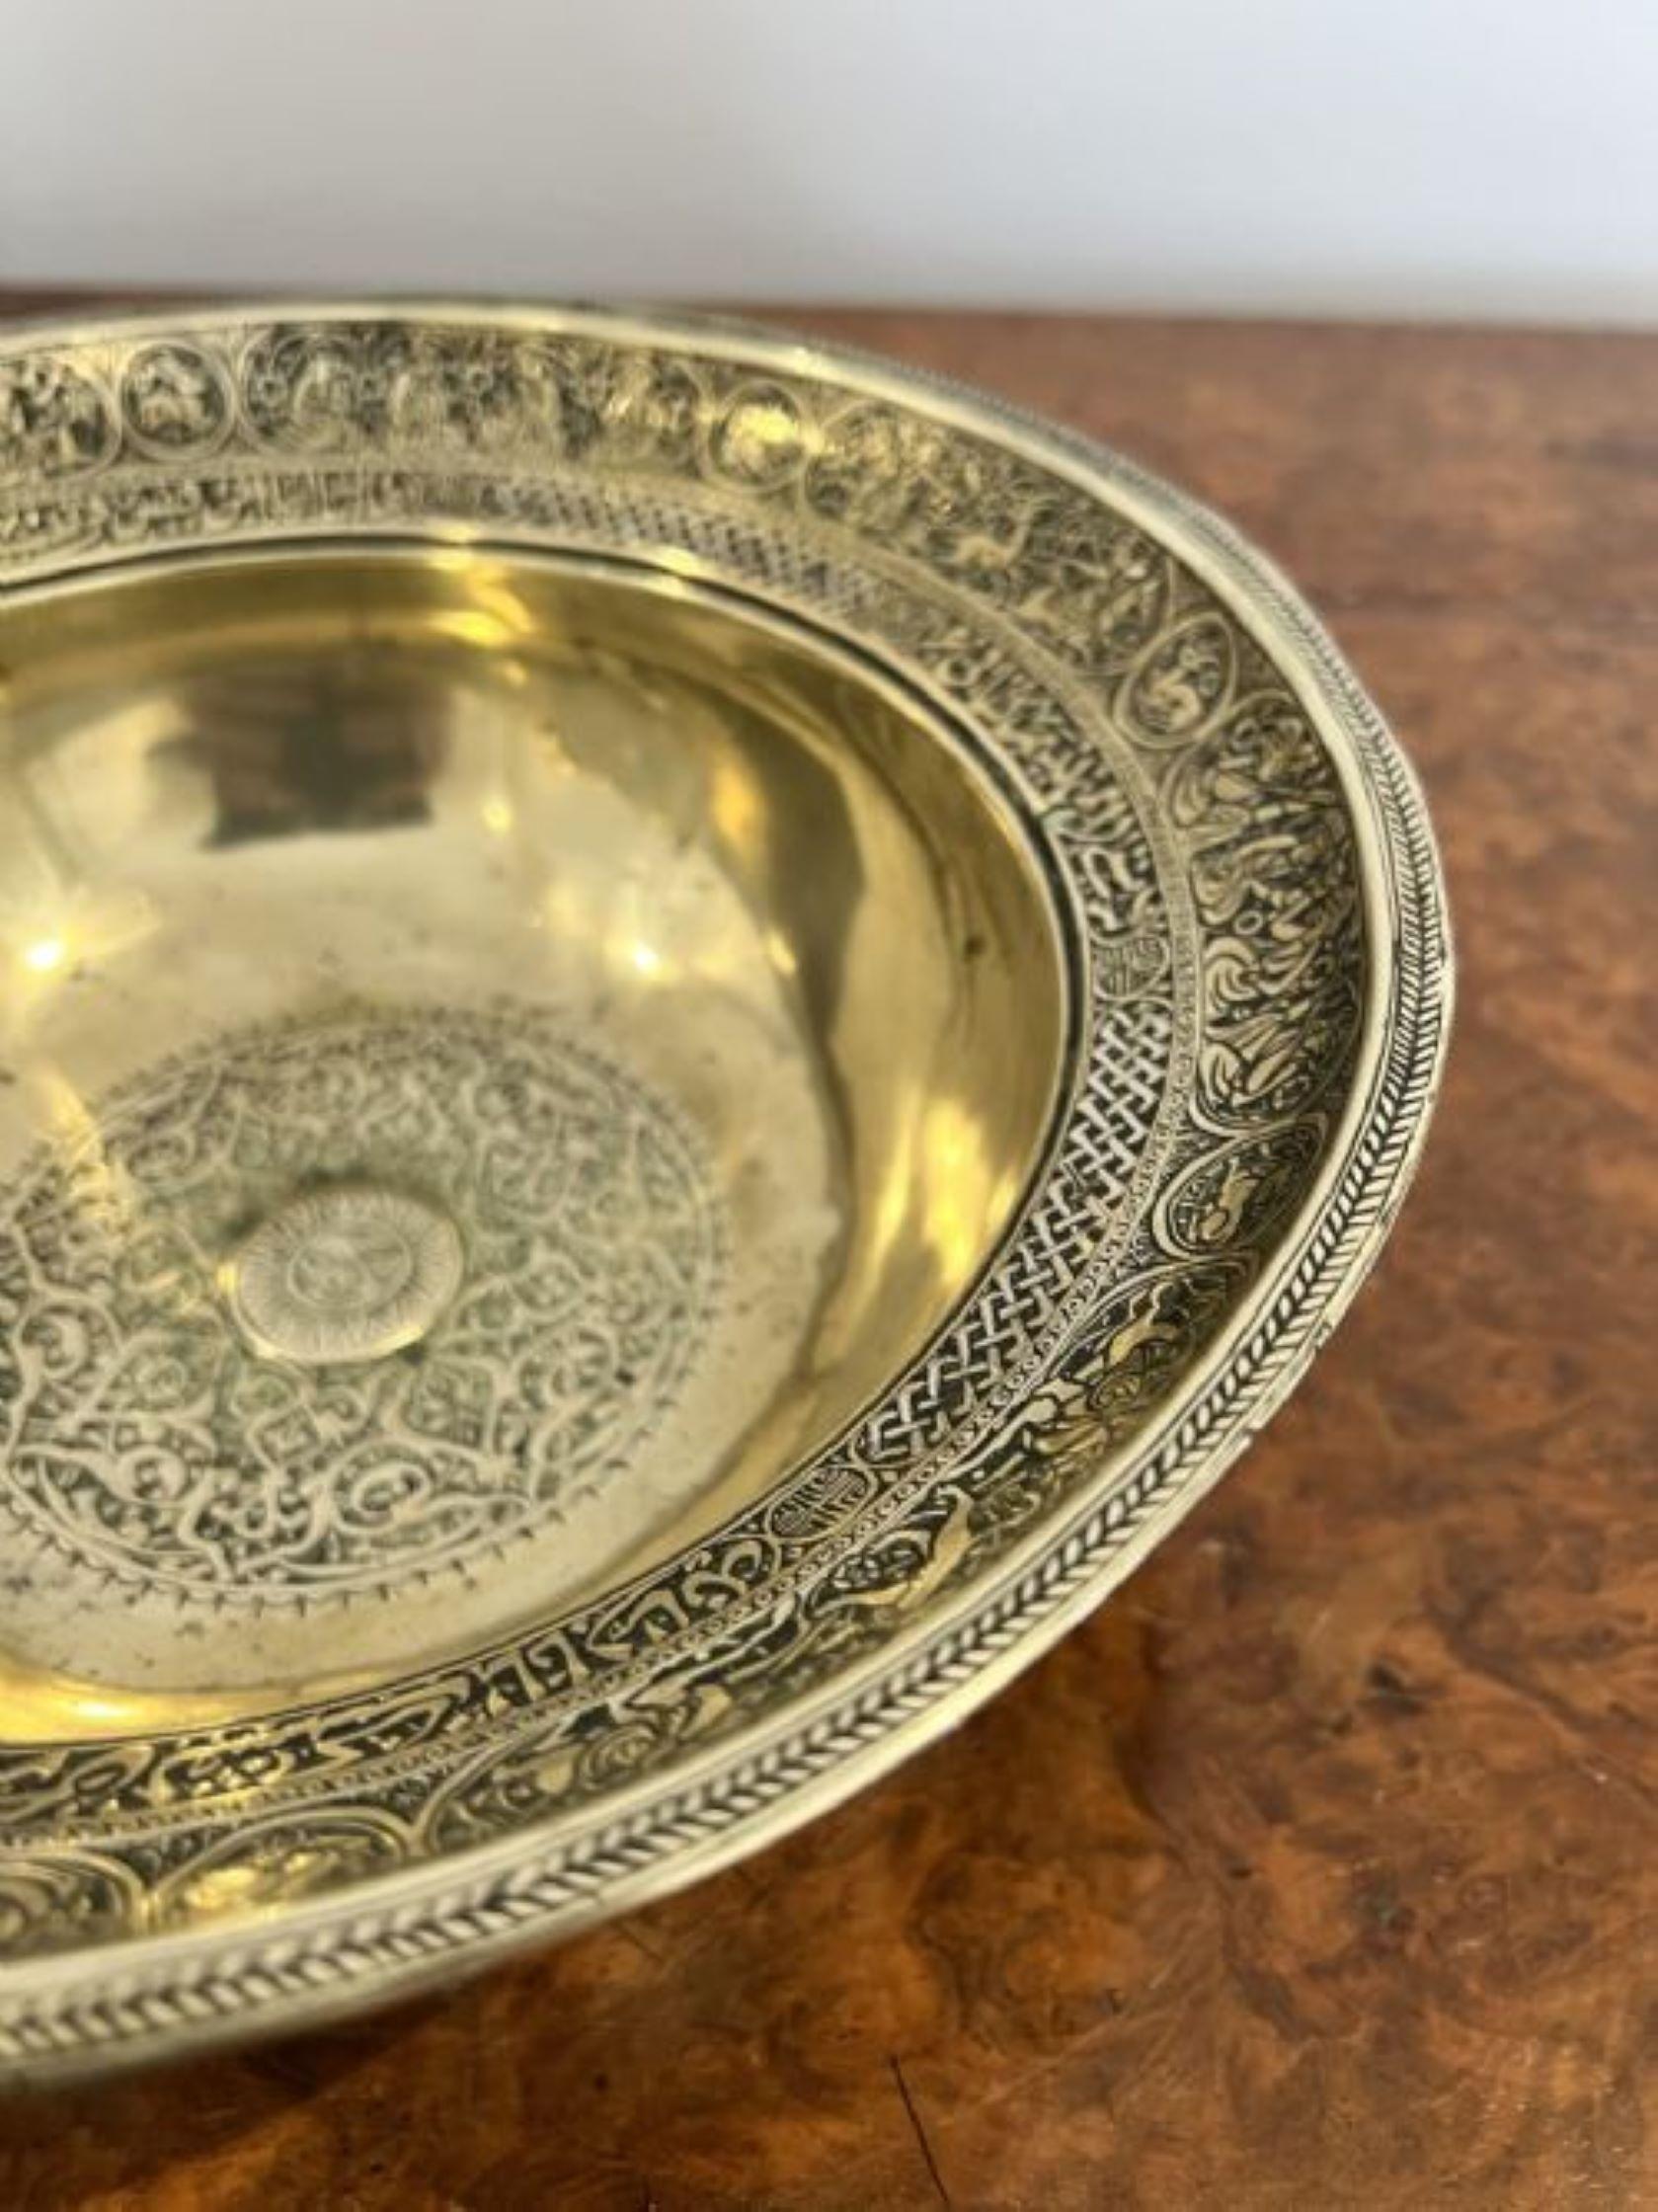 Impressive antique Victorian circular cairoware brass and mixed metal bowl with marvellous ornate decorated panels 